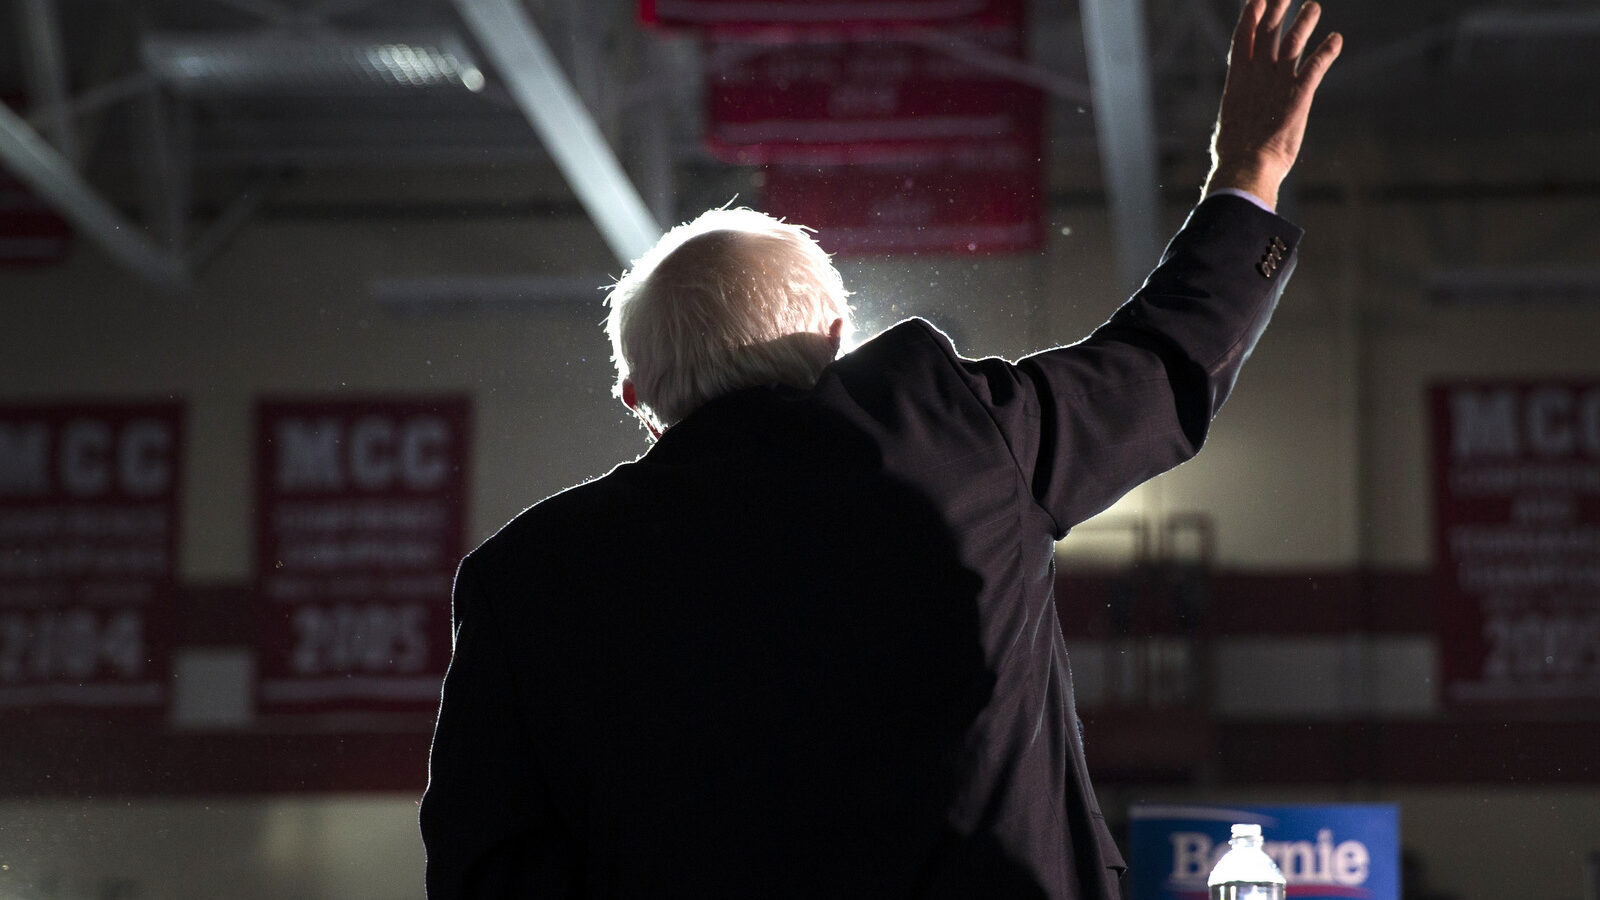 Democratic presidential candidate Sen. Bernie Sanders, I-Vt., waves during a campaign rally at Grand View University, on Sunday, Jan. 31, 2016, in Des Moines, Iowa. (AP Photo/Evan Vucci)